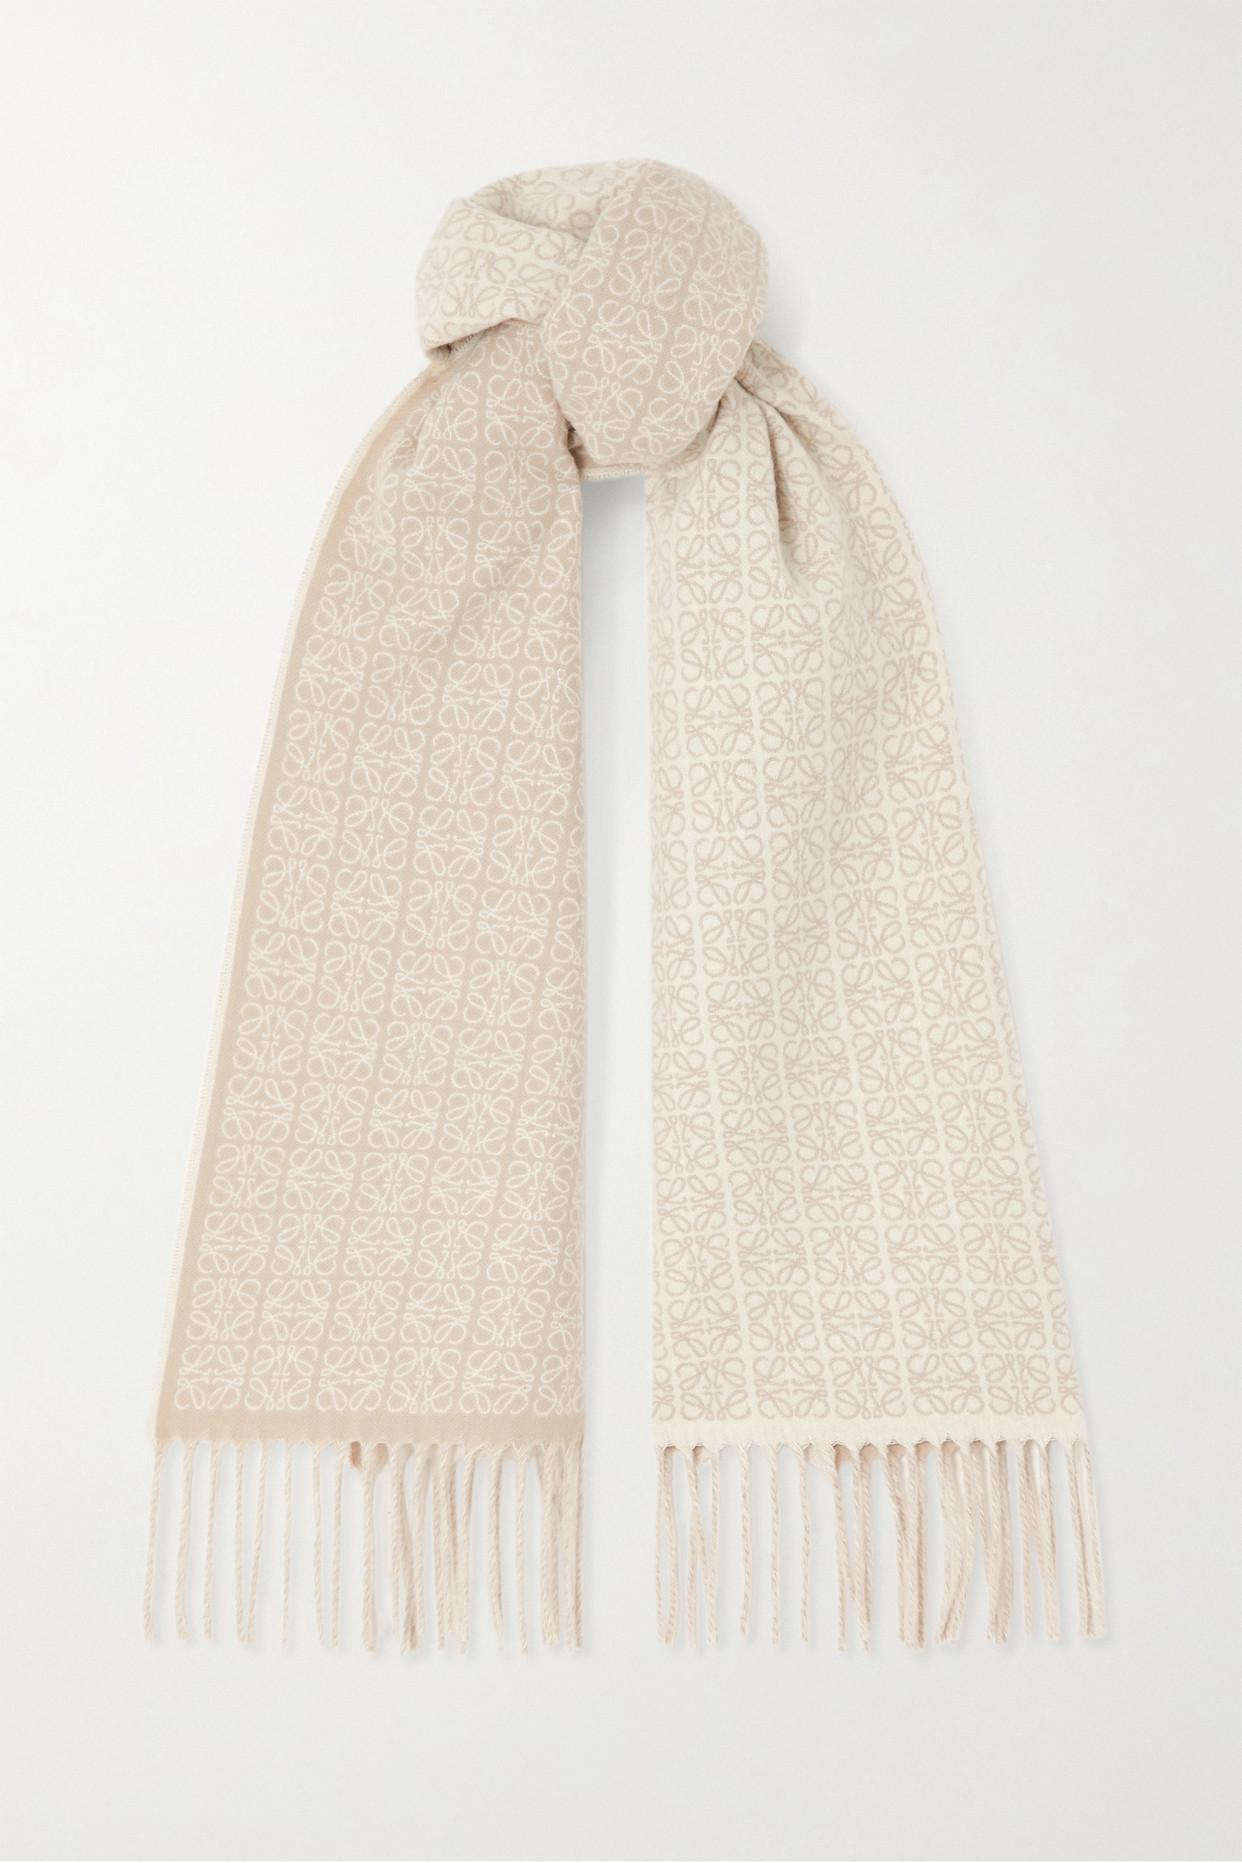 Loewe Reversible Leather-trimmed Jacquard-knit Cashmere Scarf in Natural |  Lyst